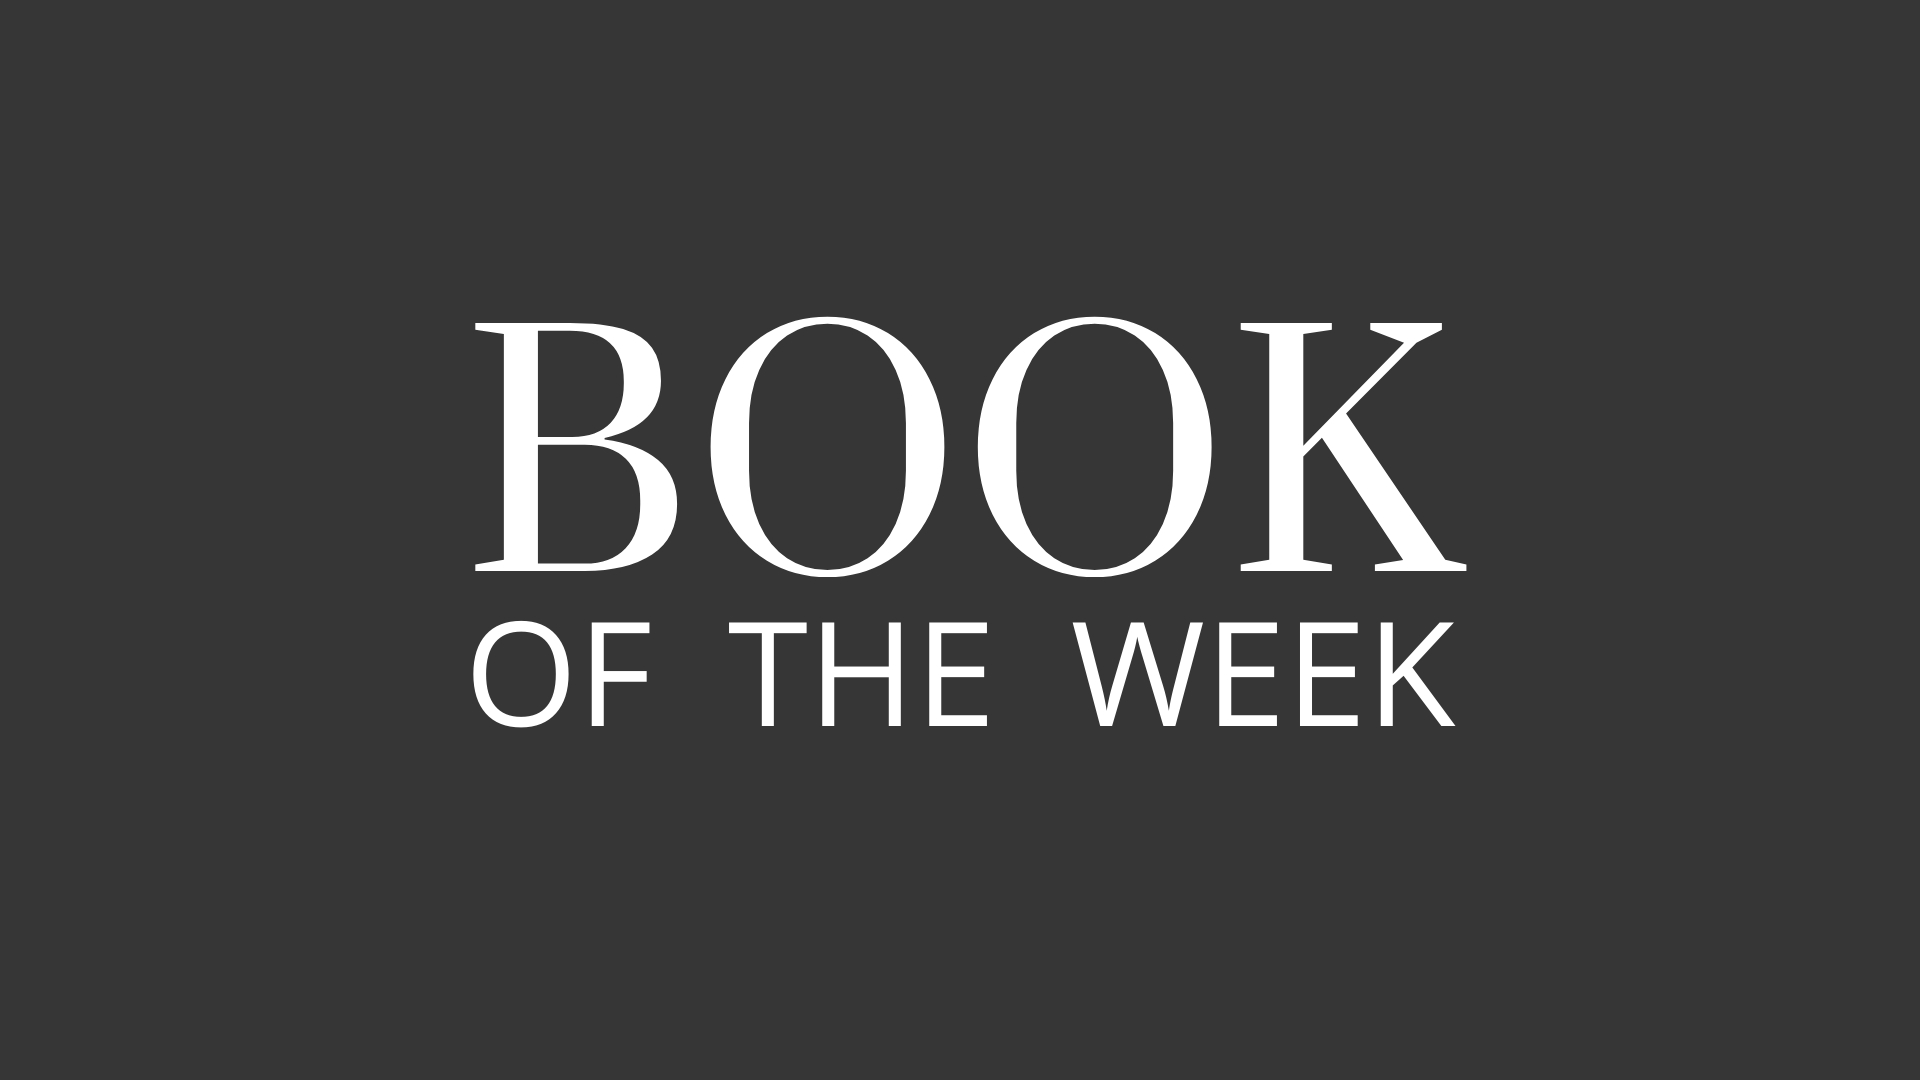 Book of the Week: The 7 Habits of Highly Effective People